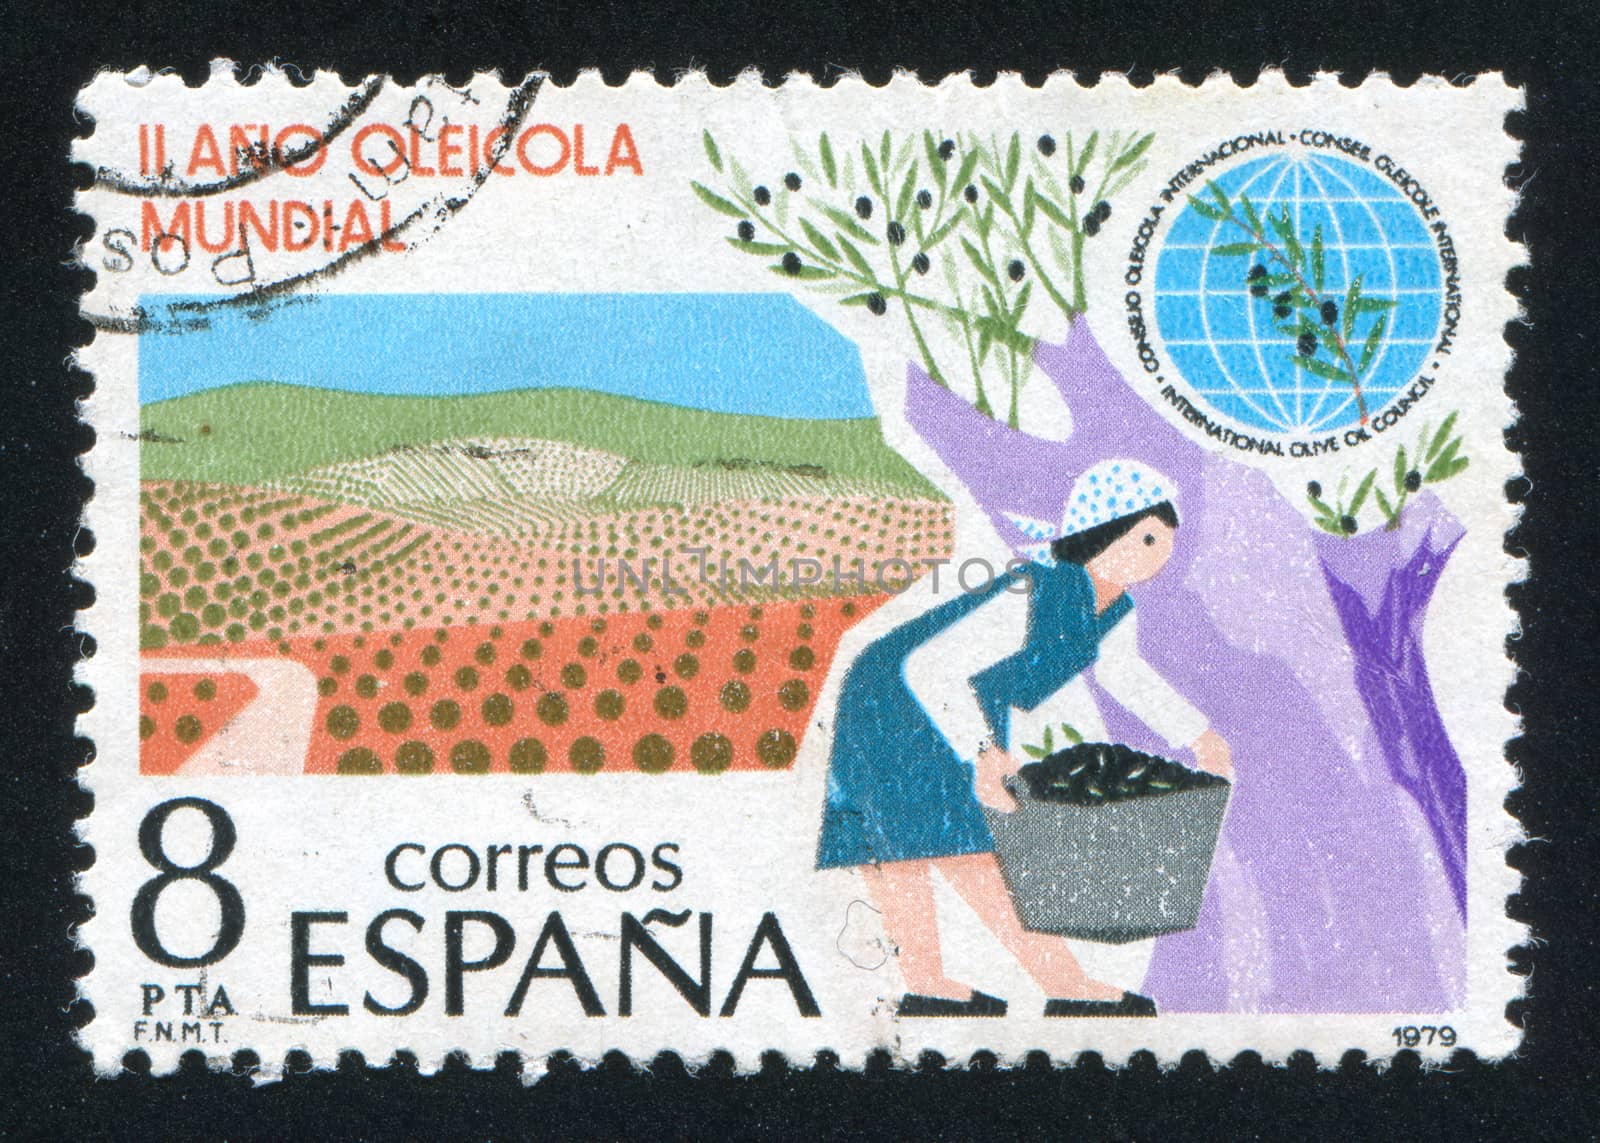 SPAIN - CIRCA 1979: stamp printed by Spain, shows Field and Olive, circa 1979